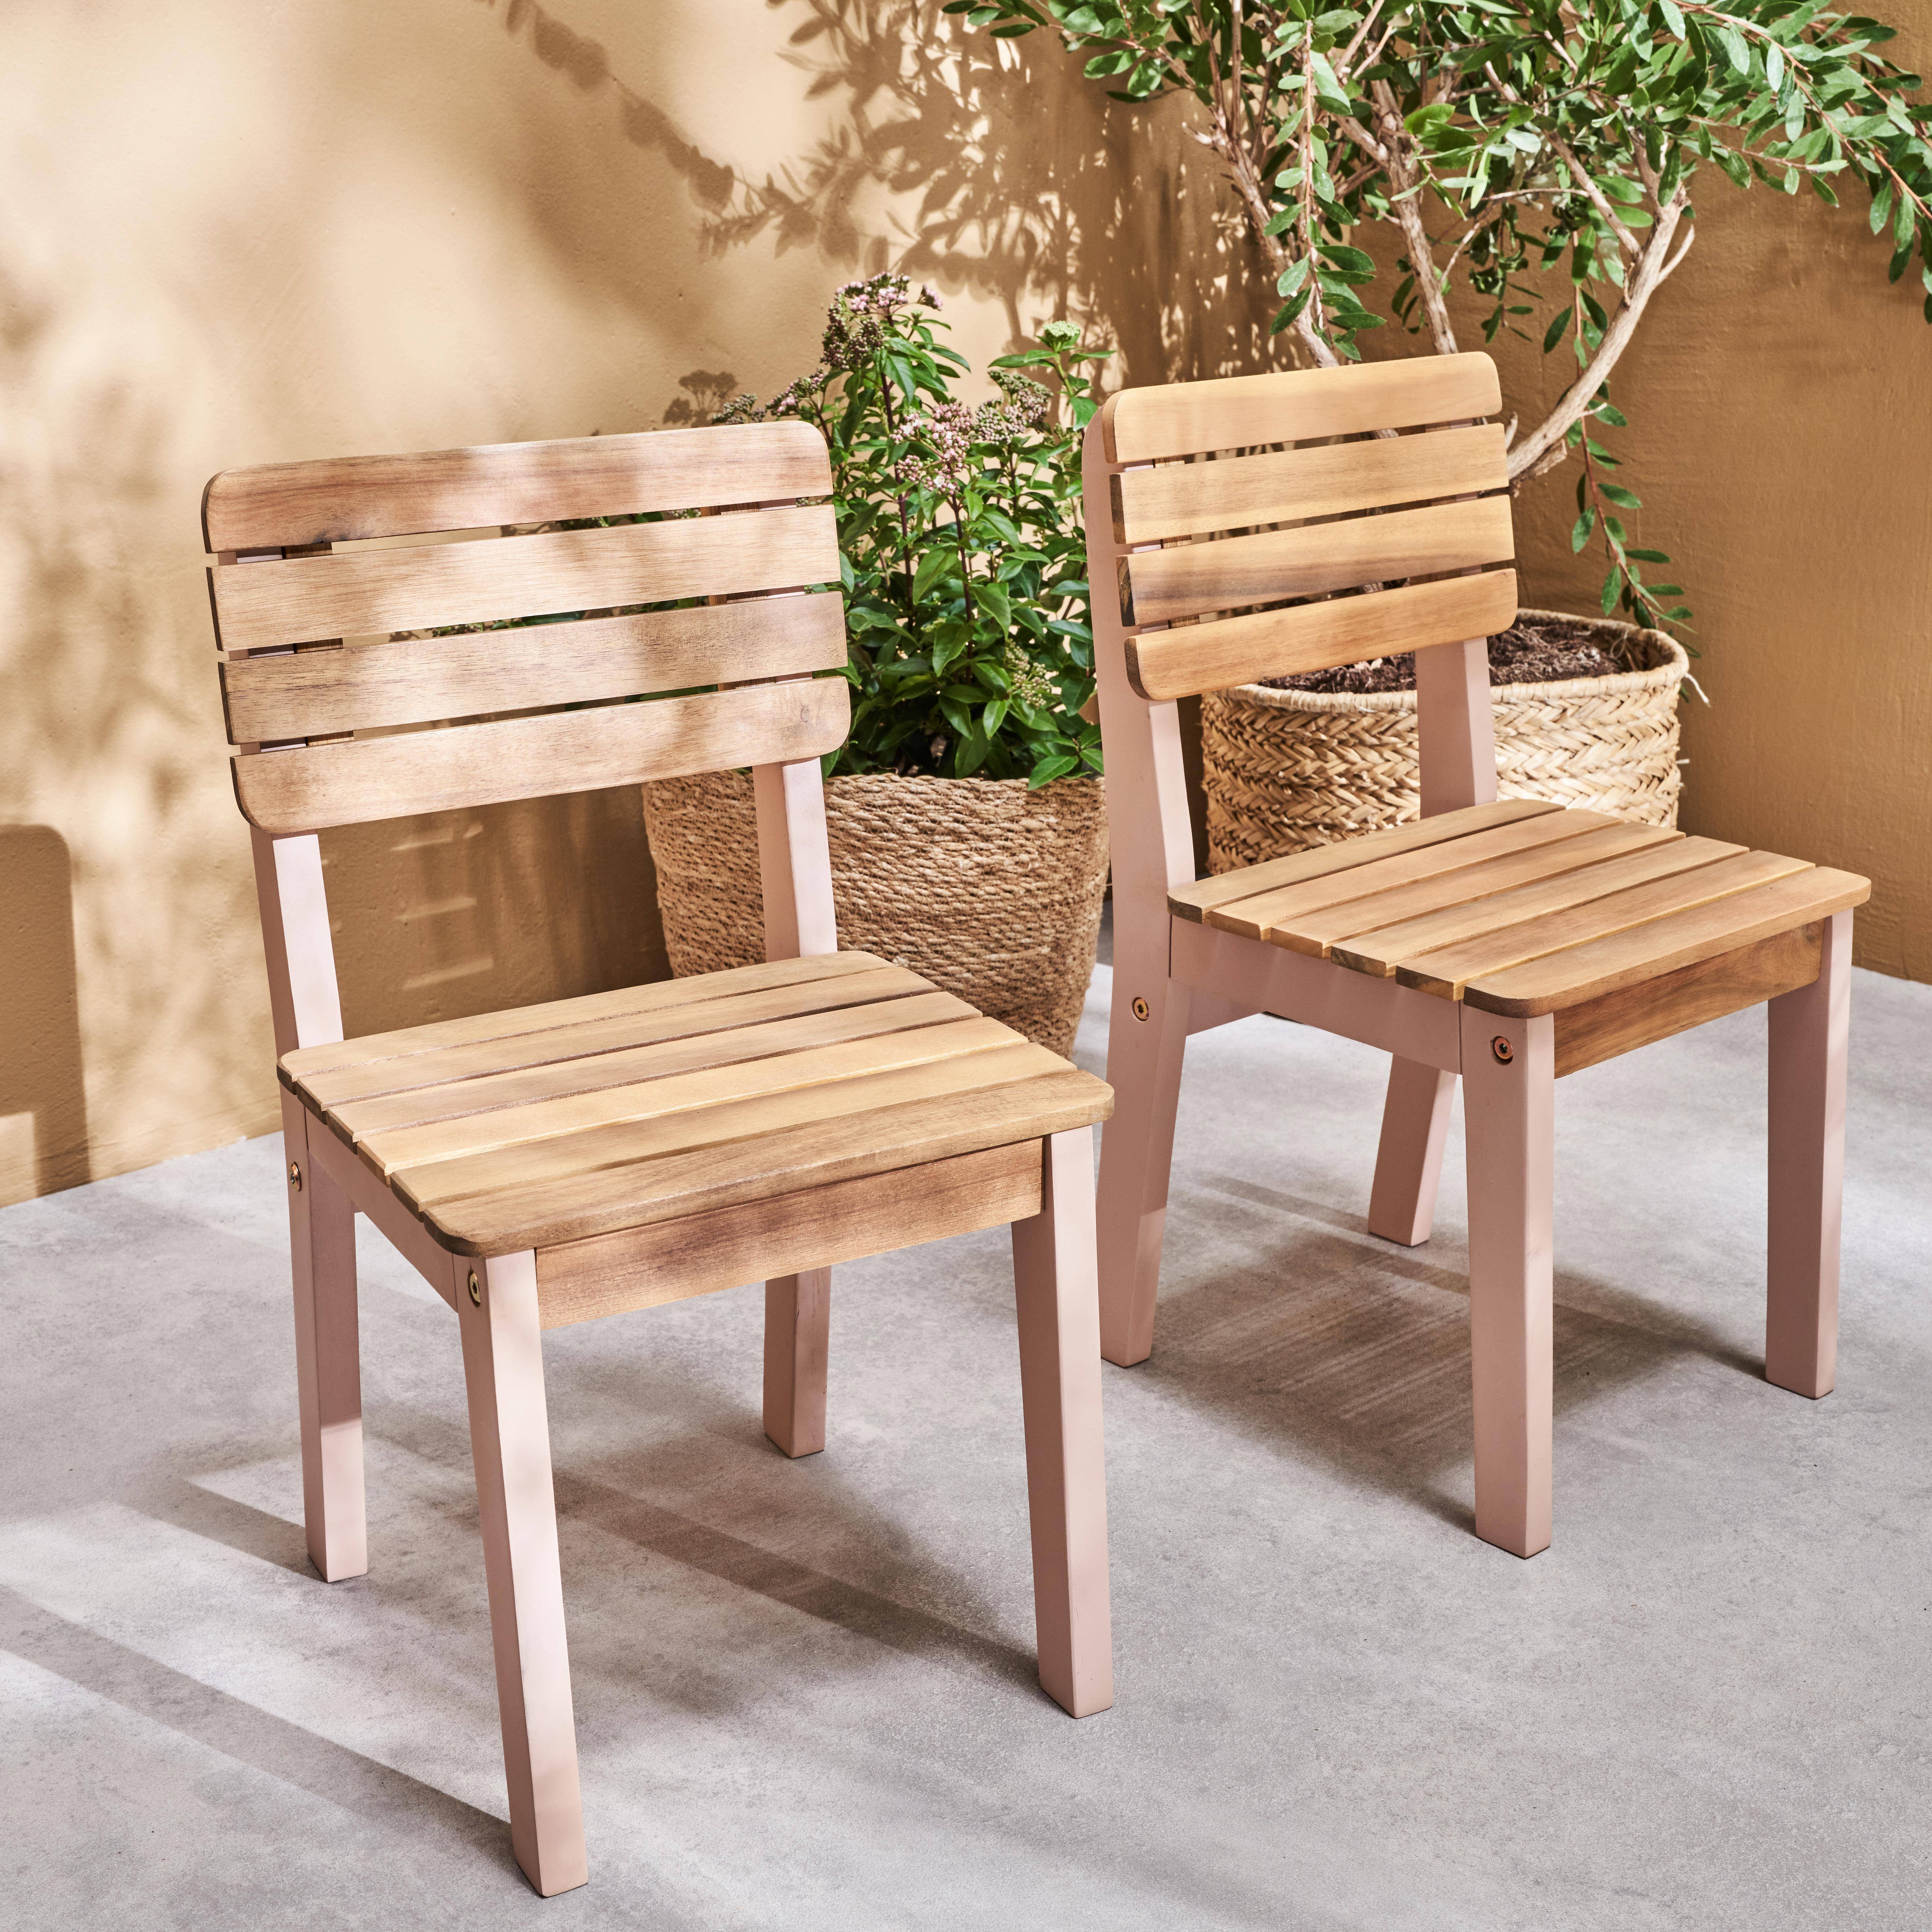 Solid Wood Chairs for Children, Indoor/Outdoor (Set of 2), pink, L29 x D31.5 x H53 cm,sweeek,Photo2